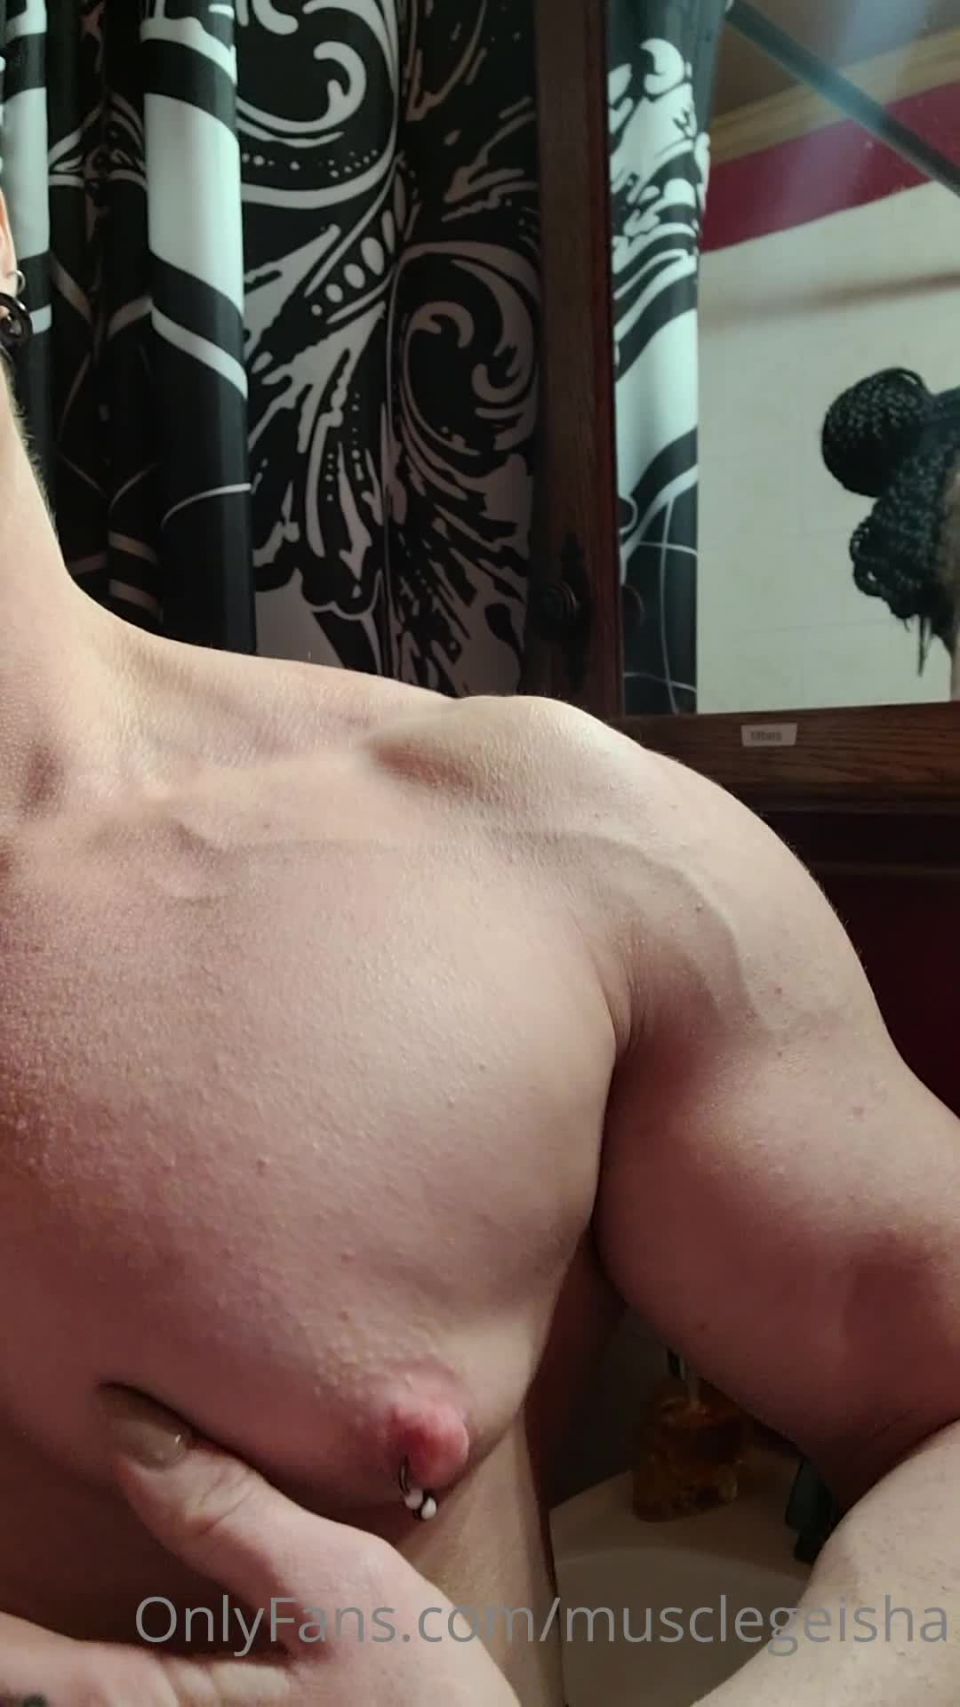 MuscleGeisha () Musclegeisha - i trained hours ago the marks on my skin from the weights are still showing leg da 13-01-2022